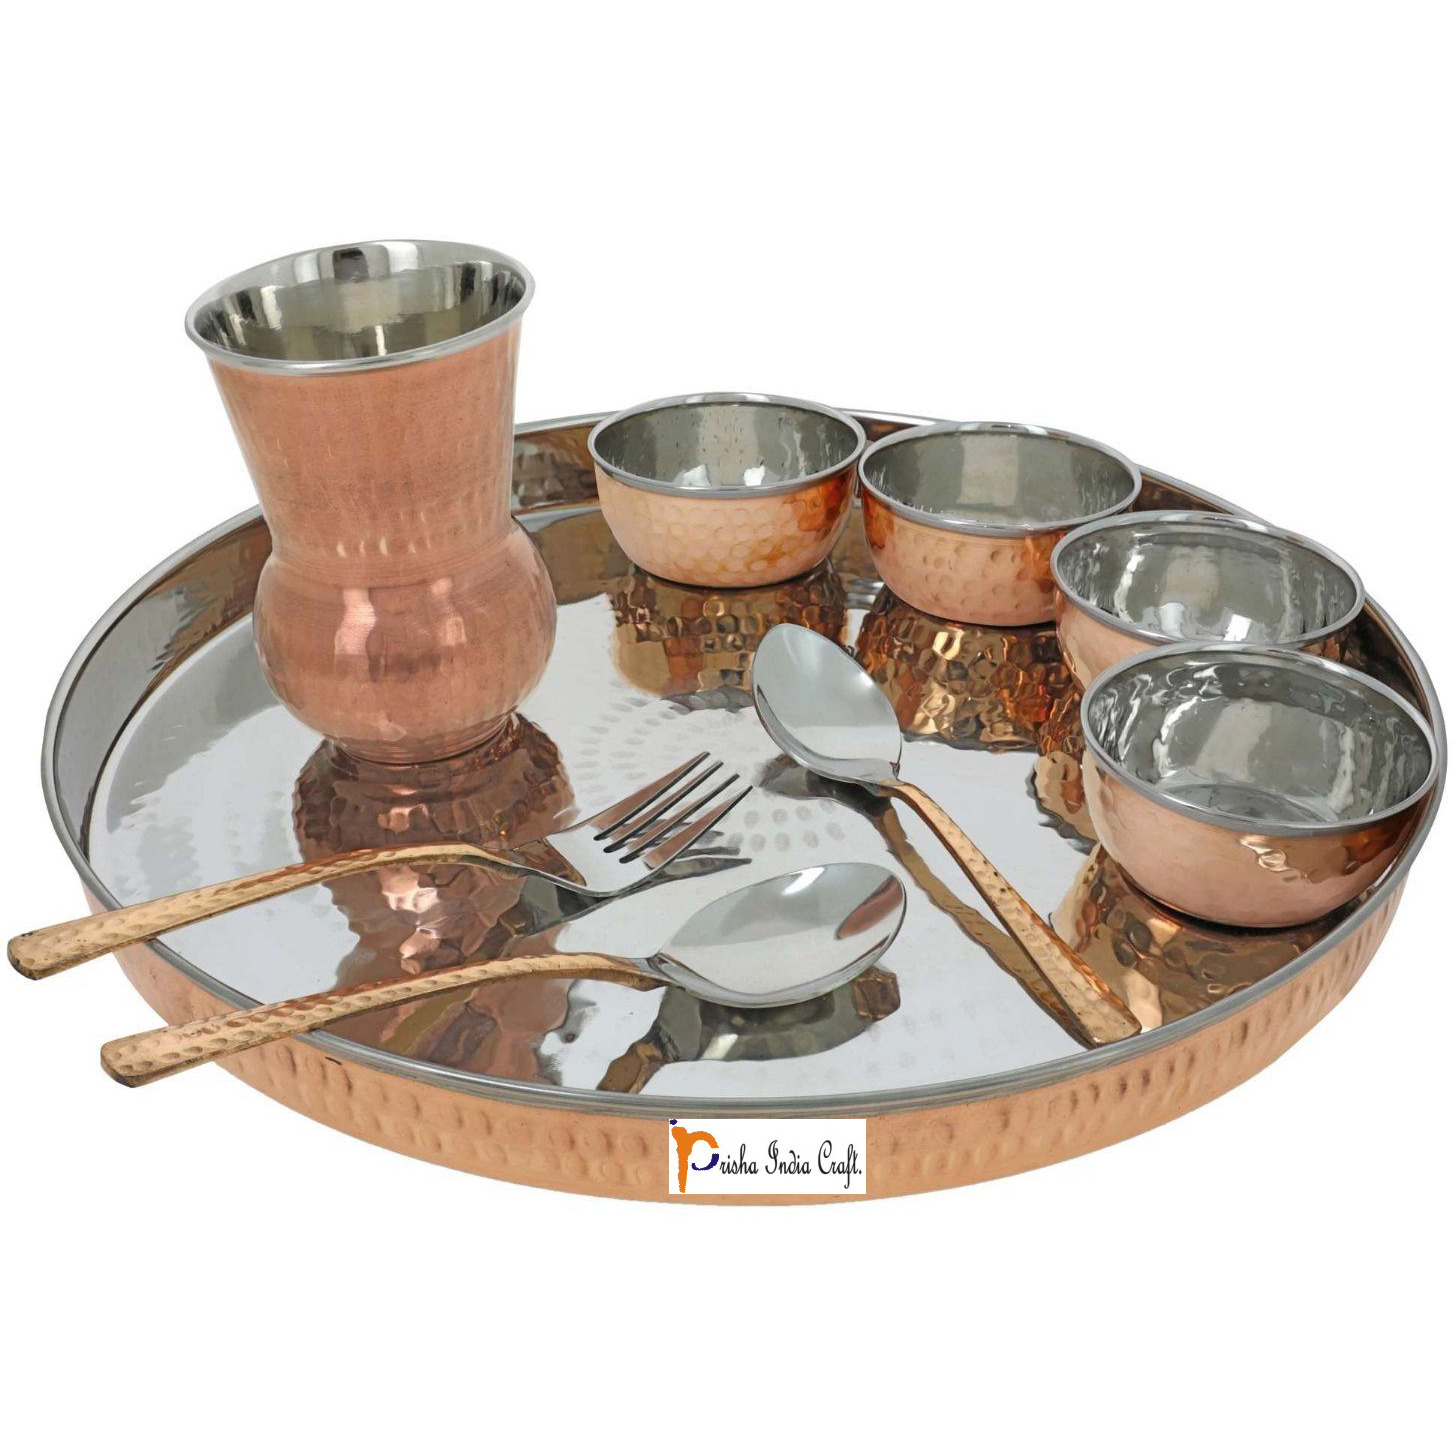 Prisha India Craft B. Set of 5 Dinnerware Traditional Stainless Steel Copper Dinner Set of Thali Plate, Bowls, Glass and Spoons, Dia 13  With 1 Pure Copper Hammered Pitcher Jug - Christmas Gift